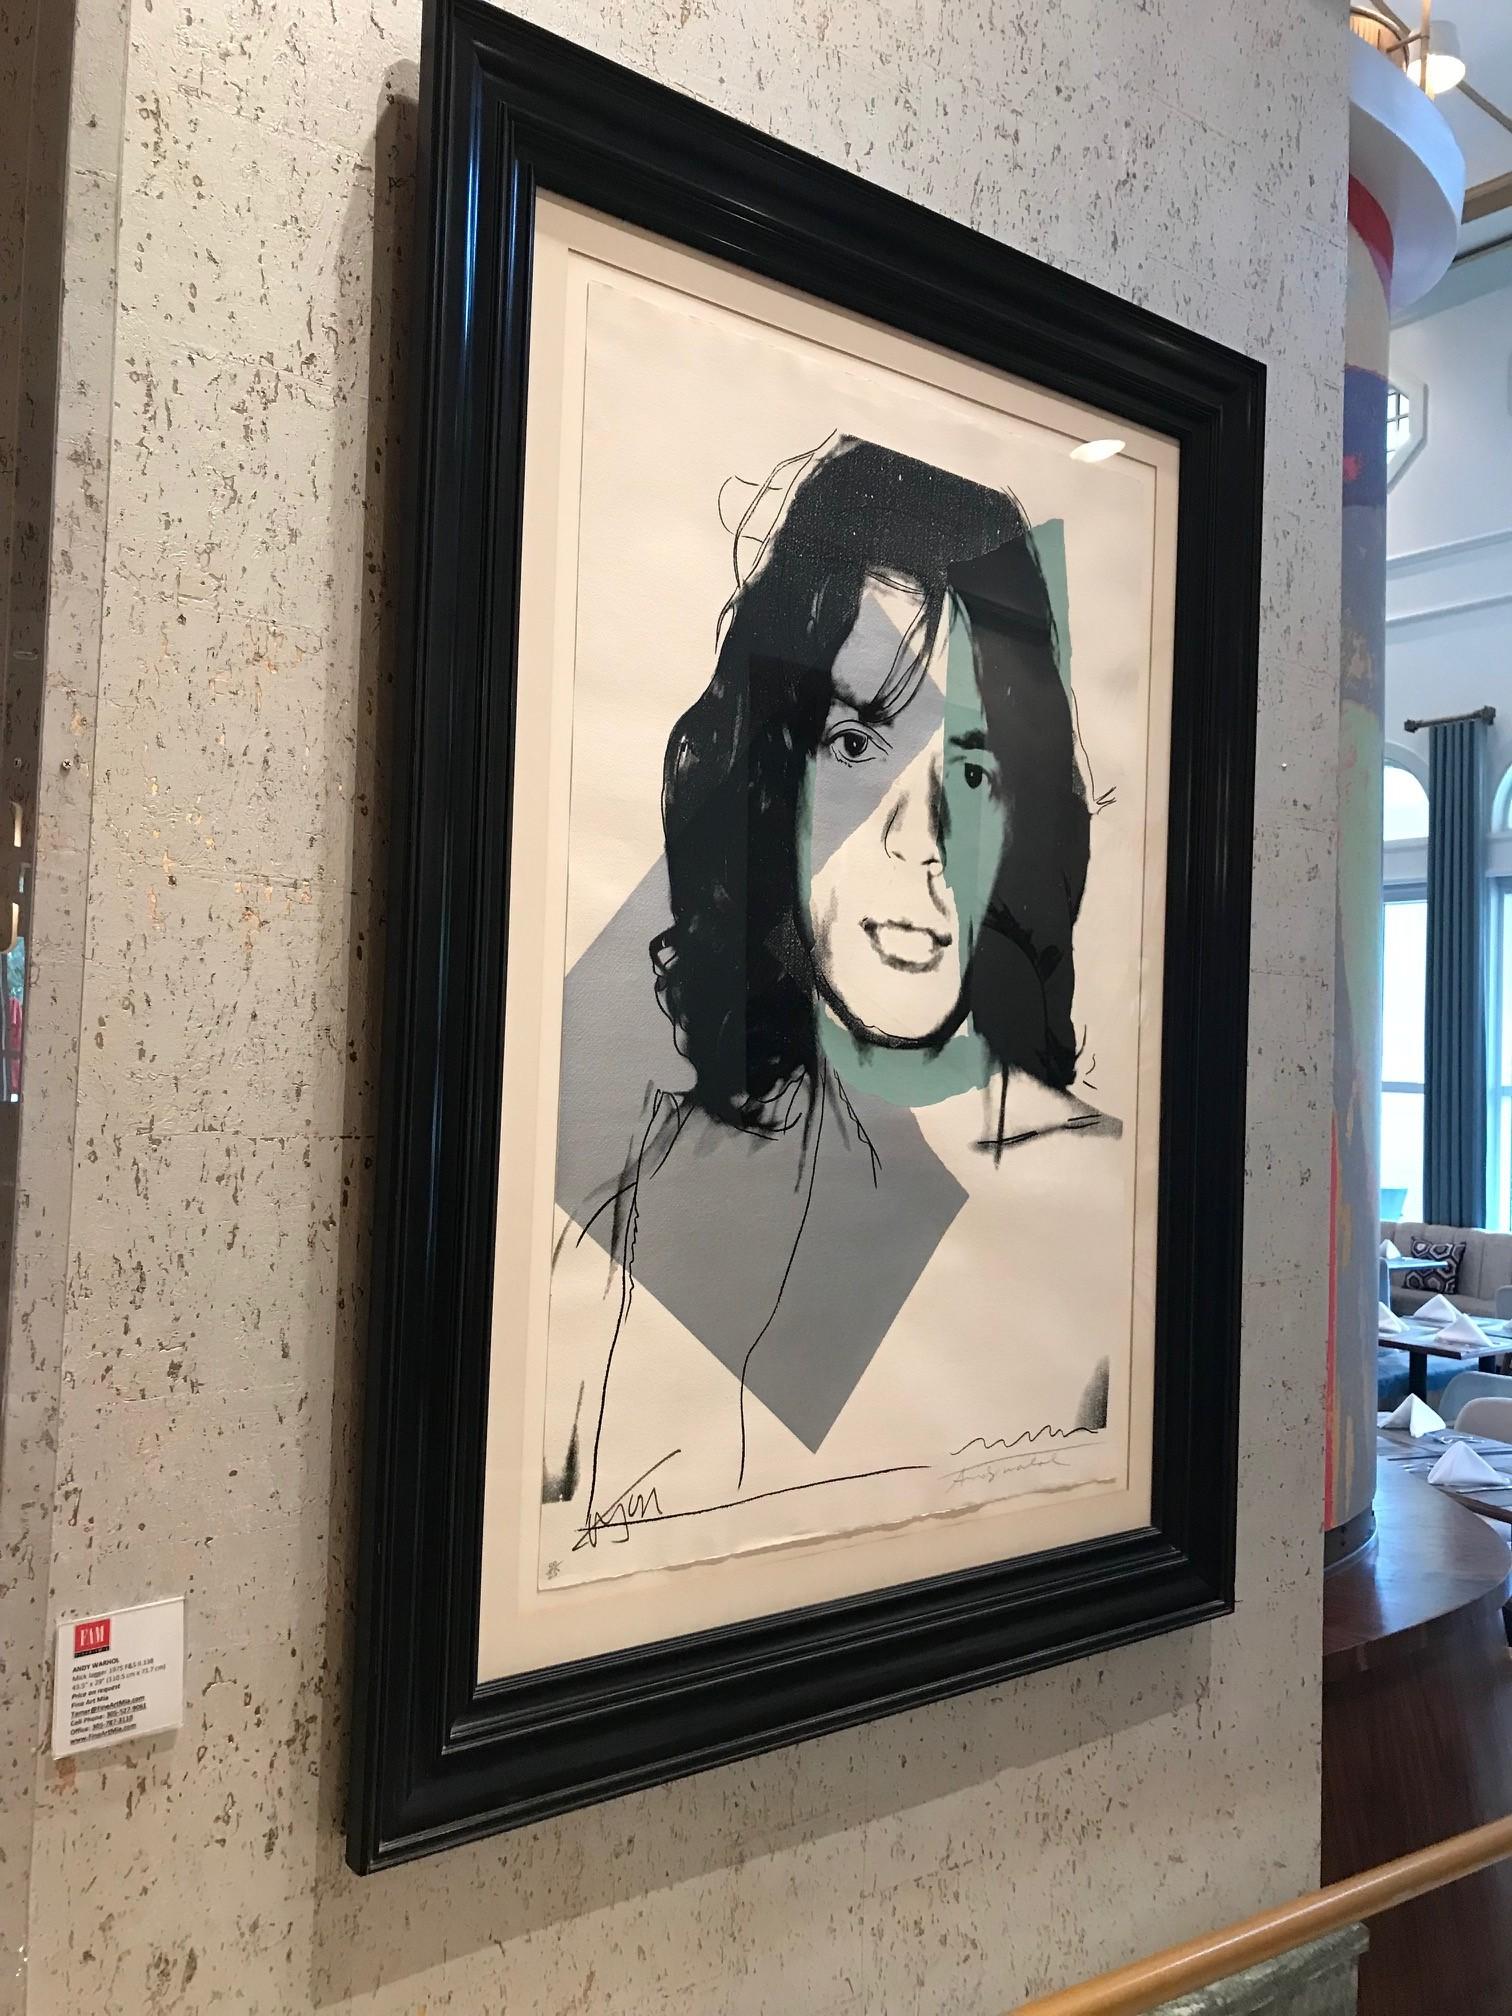 Mick Jagger F&S II.138 - Contemporary Print by Andy Warhol